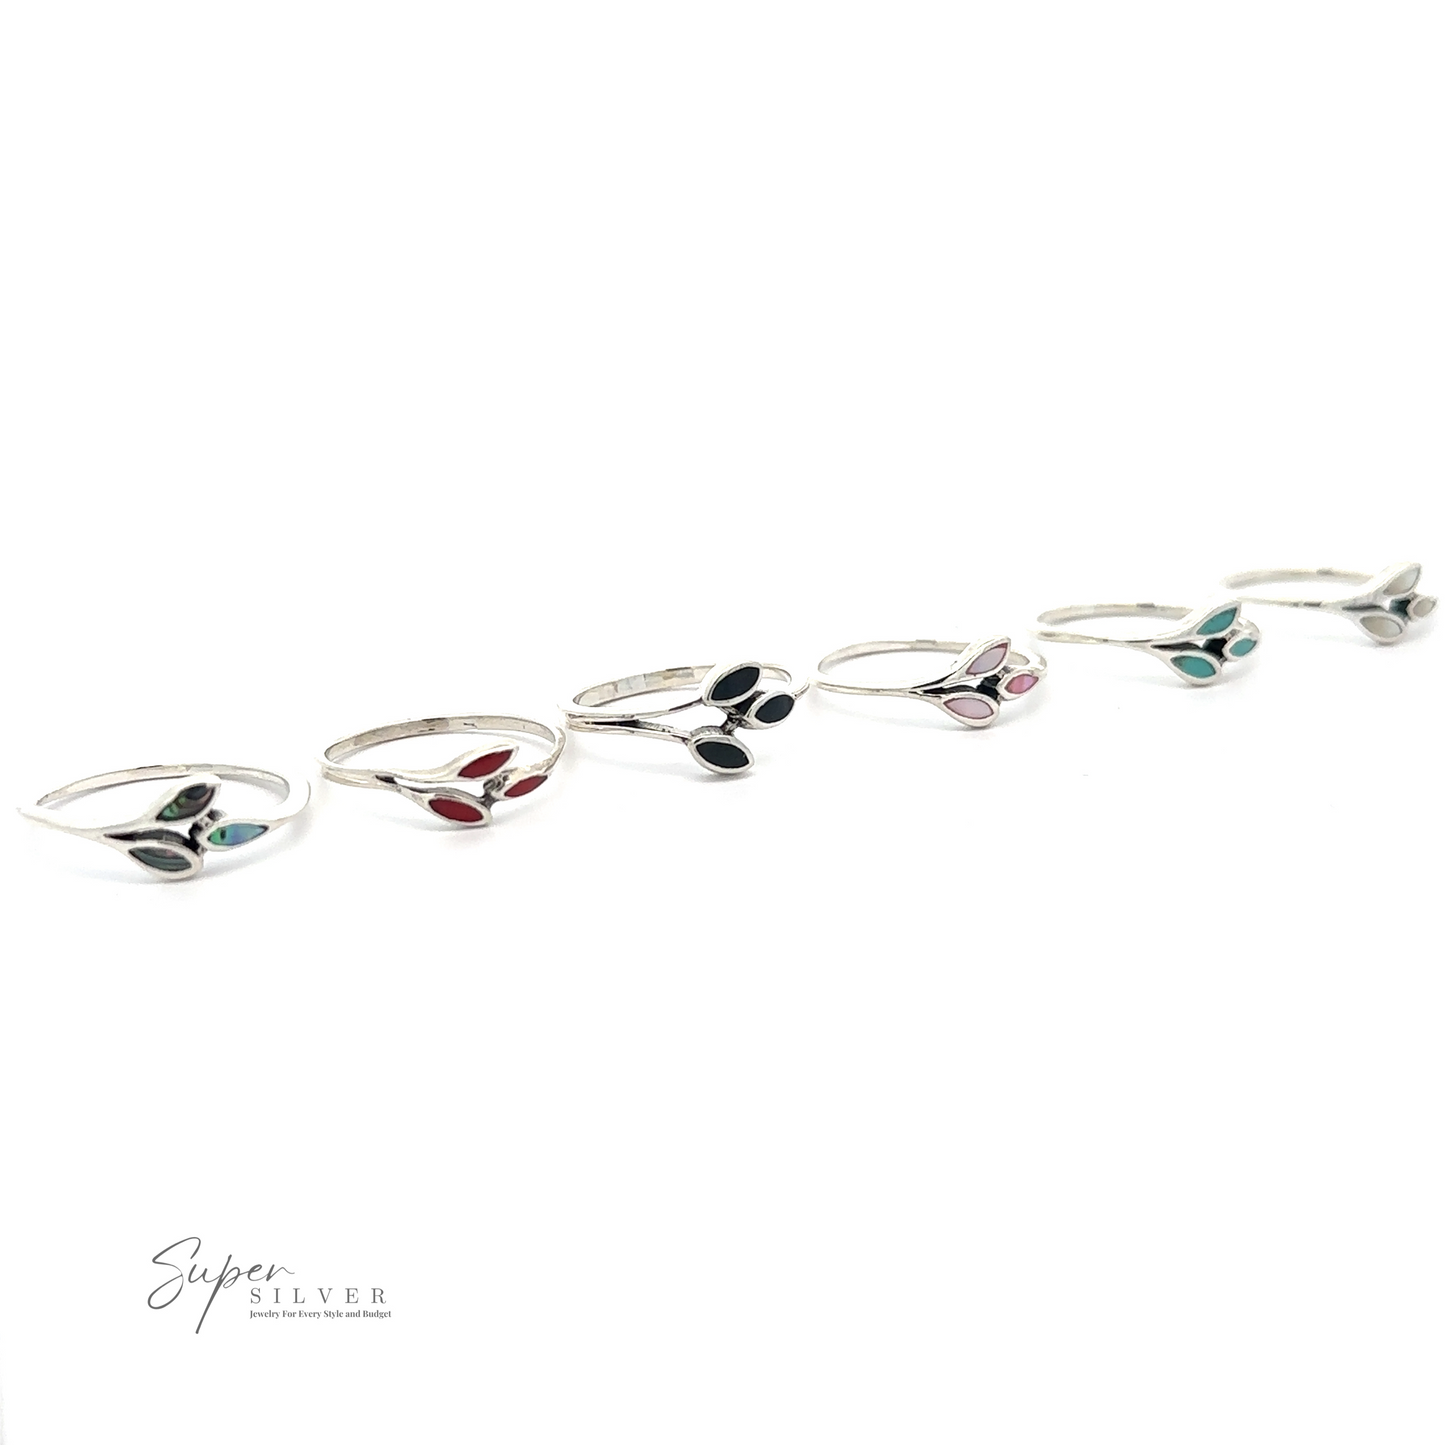 Six Tiny Leaves Rings with Inlaid Stones, each adorned with a different colored stone—blue, red, black, pink, and green—are staged in a line on a white background. The text "Super Silver" graces the bottom left corner. Each minimalist ring features subtle details for a touch of elegance.